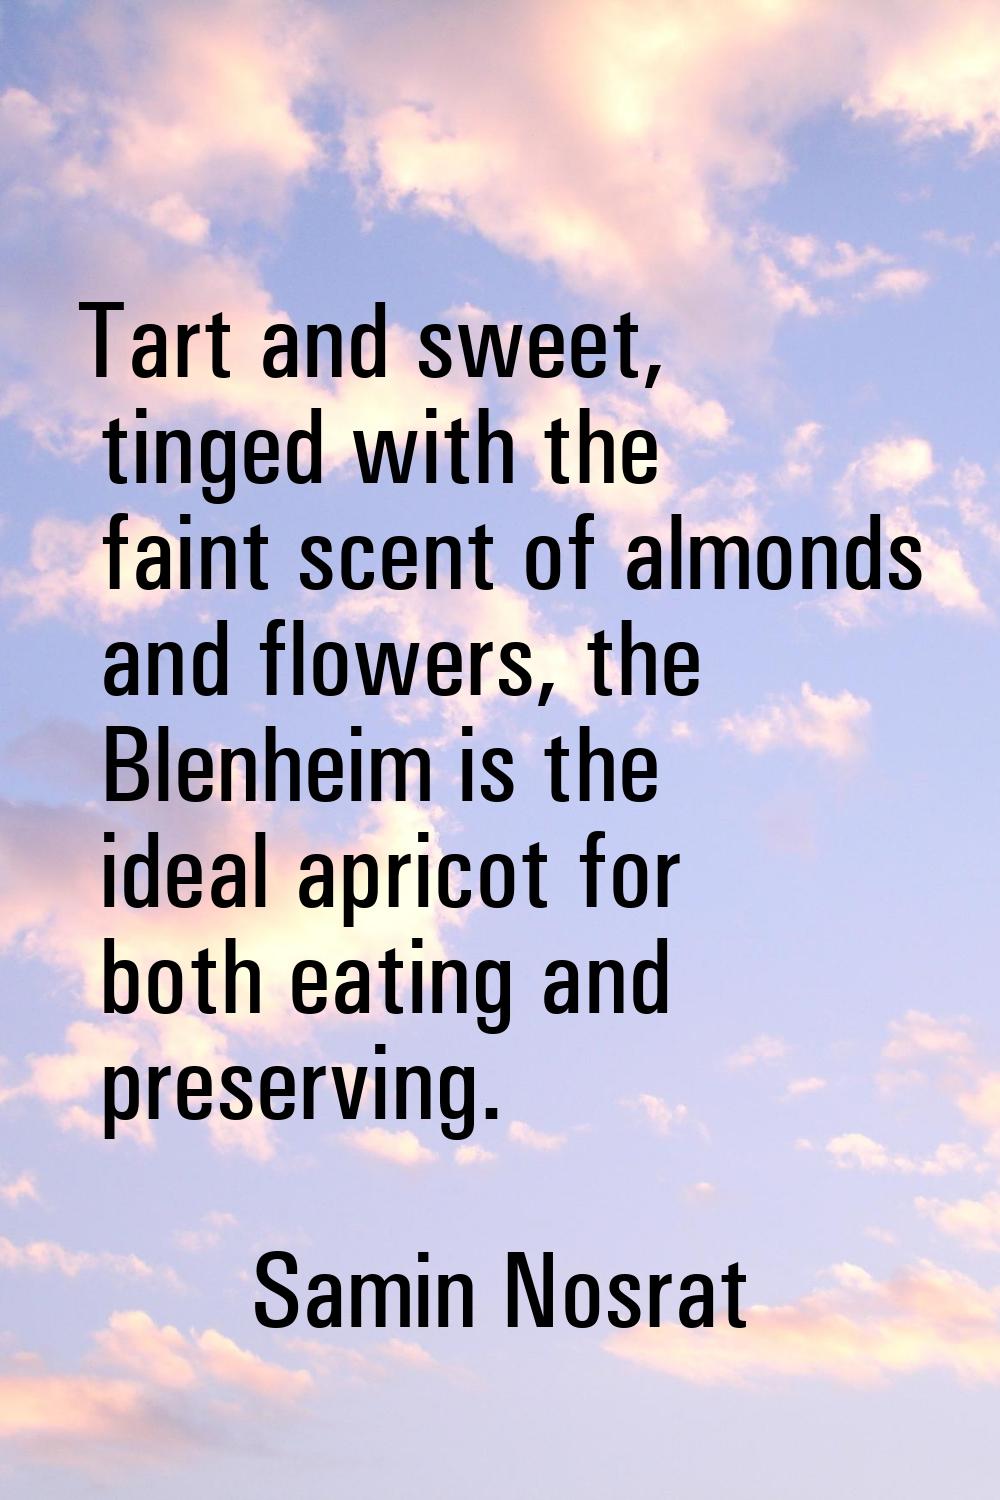 Tart and sweet, tinged with the faint scent of almonds and flowers, the Blenheim is the ideal apric